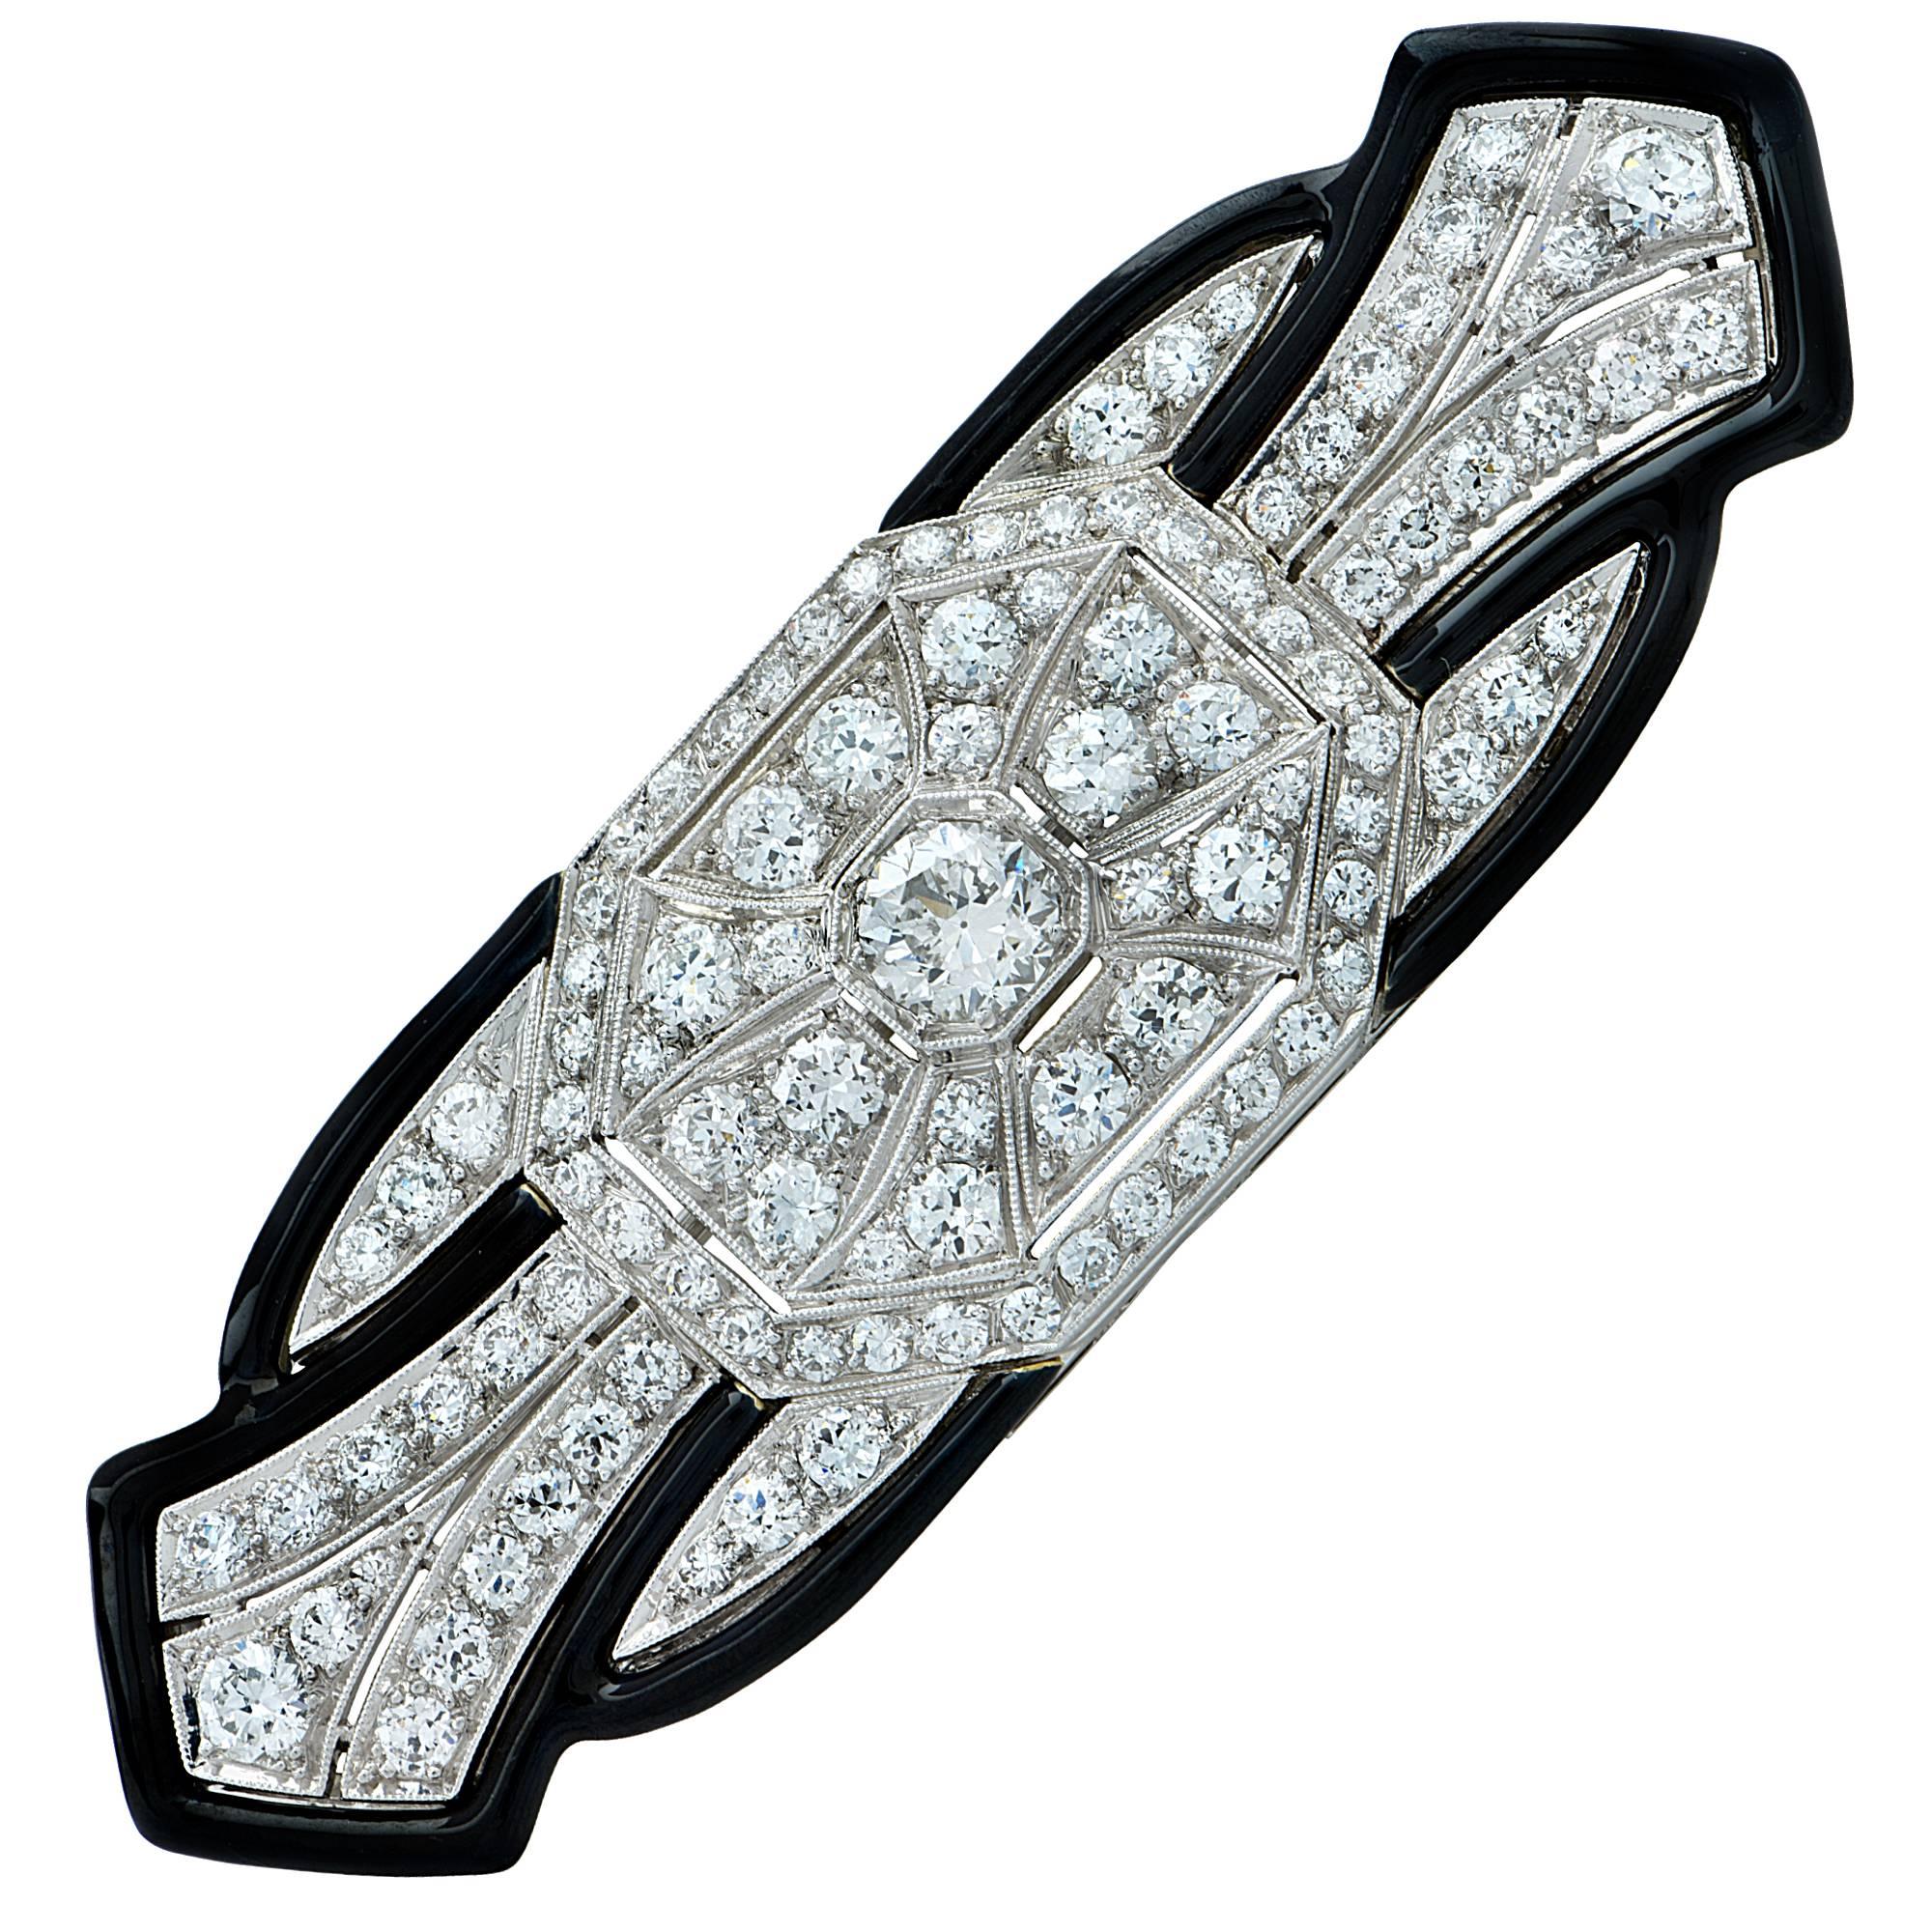 Rare Platinum Tiffany and Co. Art Deco brooch pin crafted in platinum, featuring approximately 4cts total weight of Old European cut diamonds F color VS clarity accented by enamel and fine millegraine.  The geometric and symmetrical lines of this